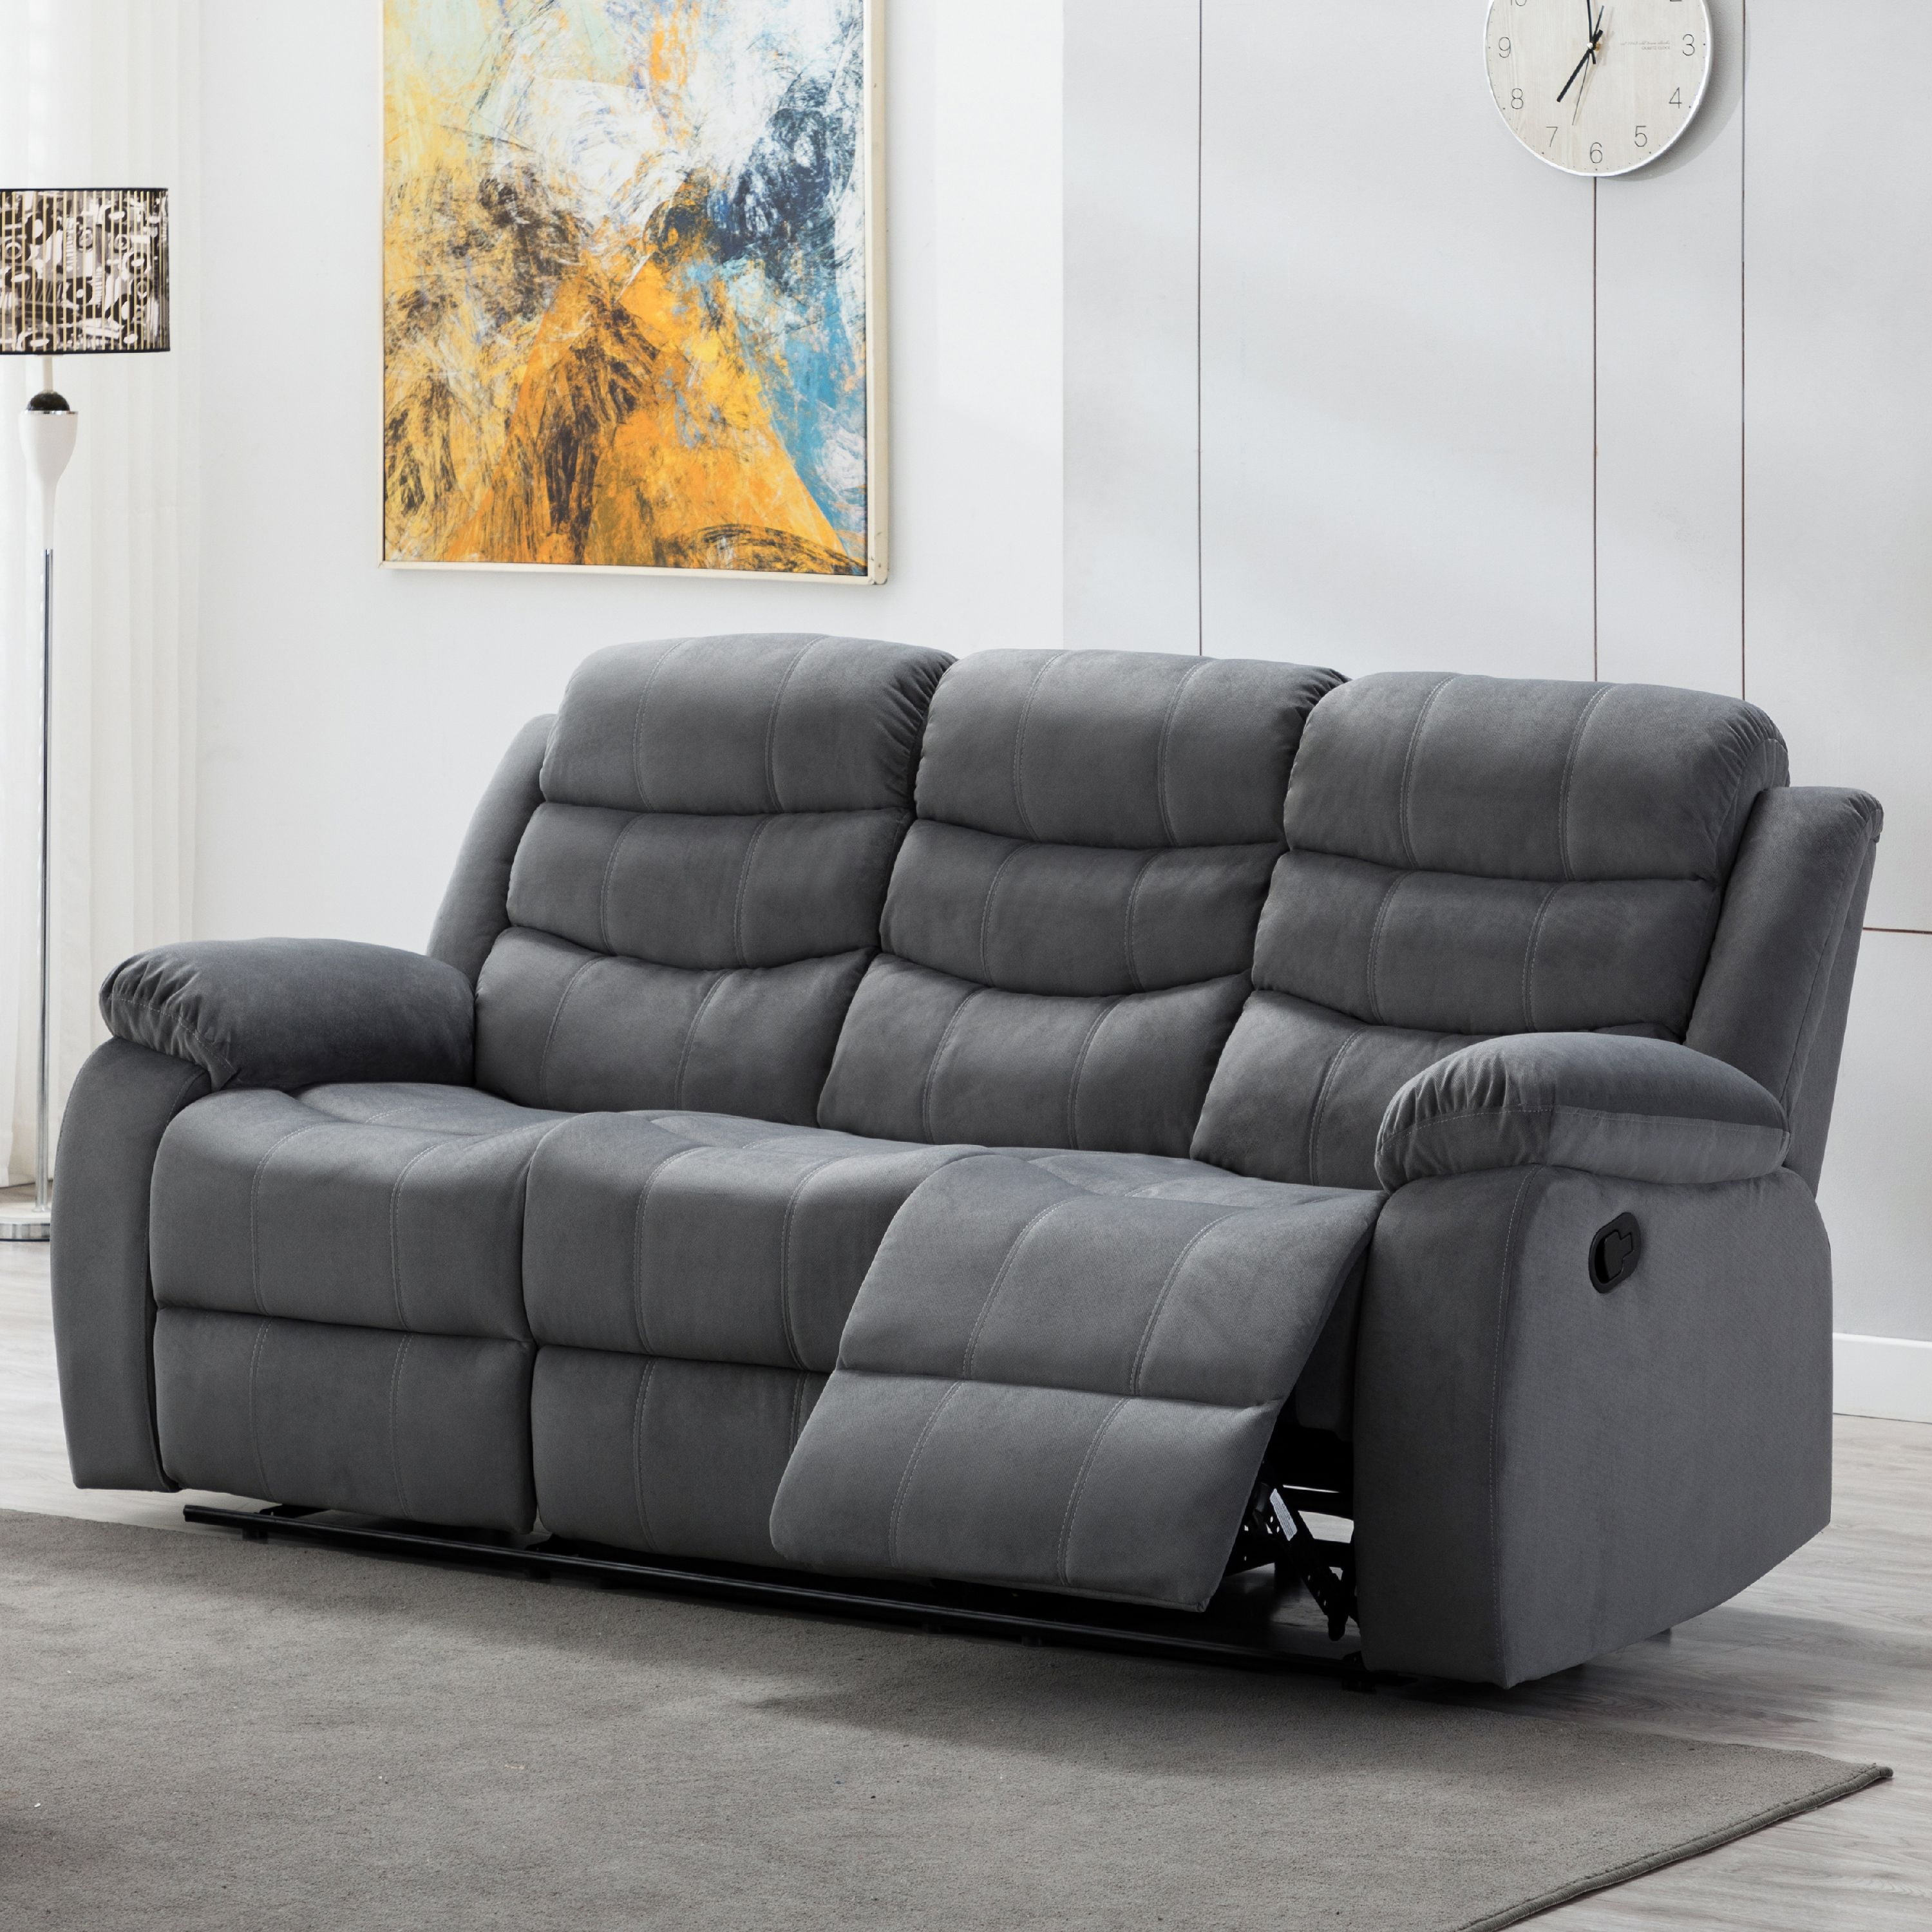 Jim Collection Contemporary Living Room Upholstered Reclining Sofa With 2 Recliners Grey Com